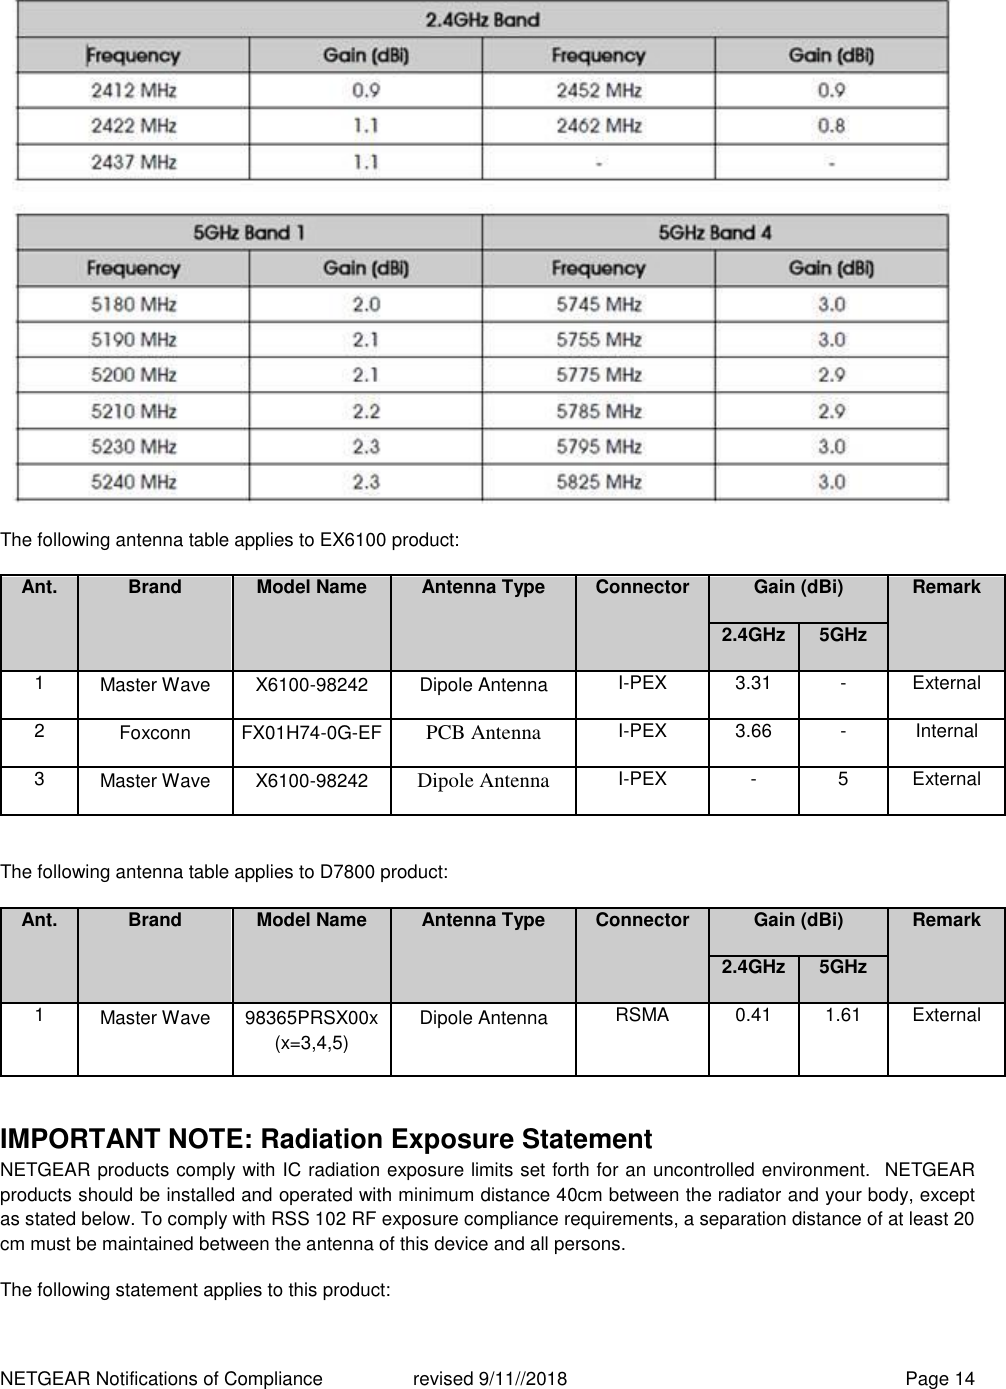 NETGEAR Notifications of Compliance    revised 9/11//2018  Page 14  The following antenna table applies to EX6100 product: Ant. Brand Model Name Antenna Type Connector Gain (dBi) Remark 2.4GHz 5GHz 1 Master Wave X6100-98242 Dipole Antenna I-PEX 3.31 - External 2 Foxconn FX01H74-0G-EF PCB Antenna I-PEX 3.66 - Internal 3 Master Wave X6100-98242 Dipole Antenna I-PEX - 5 External  The following antenna table applies to D7800 product: Ant. Brand Model Name Antenna Type Connector Gain (dBi) Remark 2.4GHz 5GHz 1 Master Wave 98365PRSX00x (x=3,4,5) Dipole Antenna RSMA 0.41 1.61 External  IMPORTANT NOTE: Radiation Exposure Statement NETGEAR products comply with IC radiation exposure limits set forth for an uncontrolled environment.  NETGEAR products should be installed and operated with minimum distance 40cm between the radiator and your body, except as stated below. To comply with RSS 102 RF exposure compliance requirements, a separation distance of at least 20 cm must be maintained between the antenna of this device and all persons. The following statement applies to this product: 